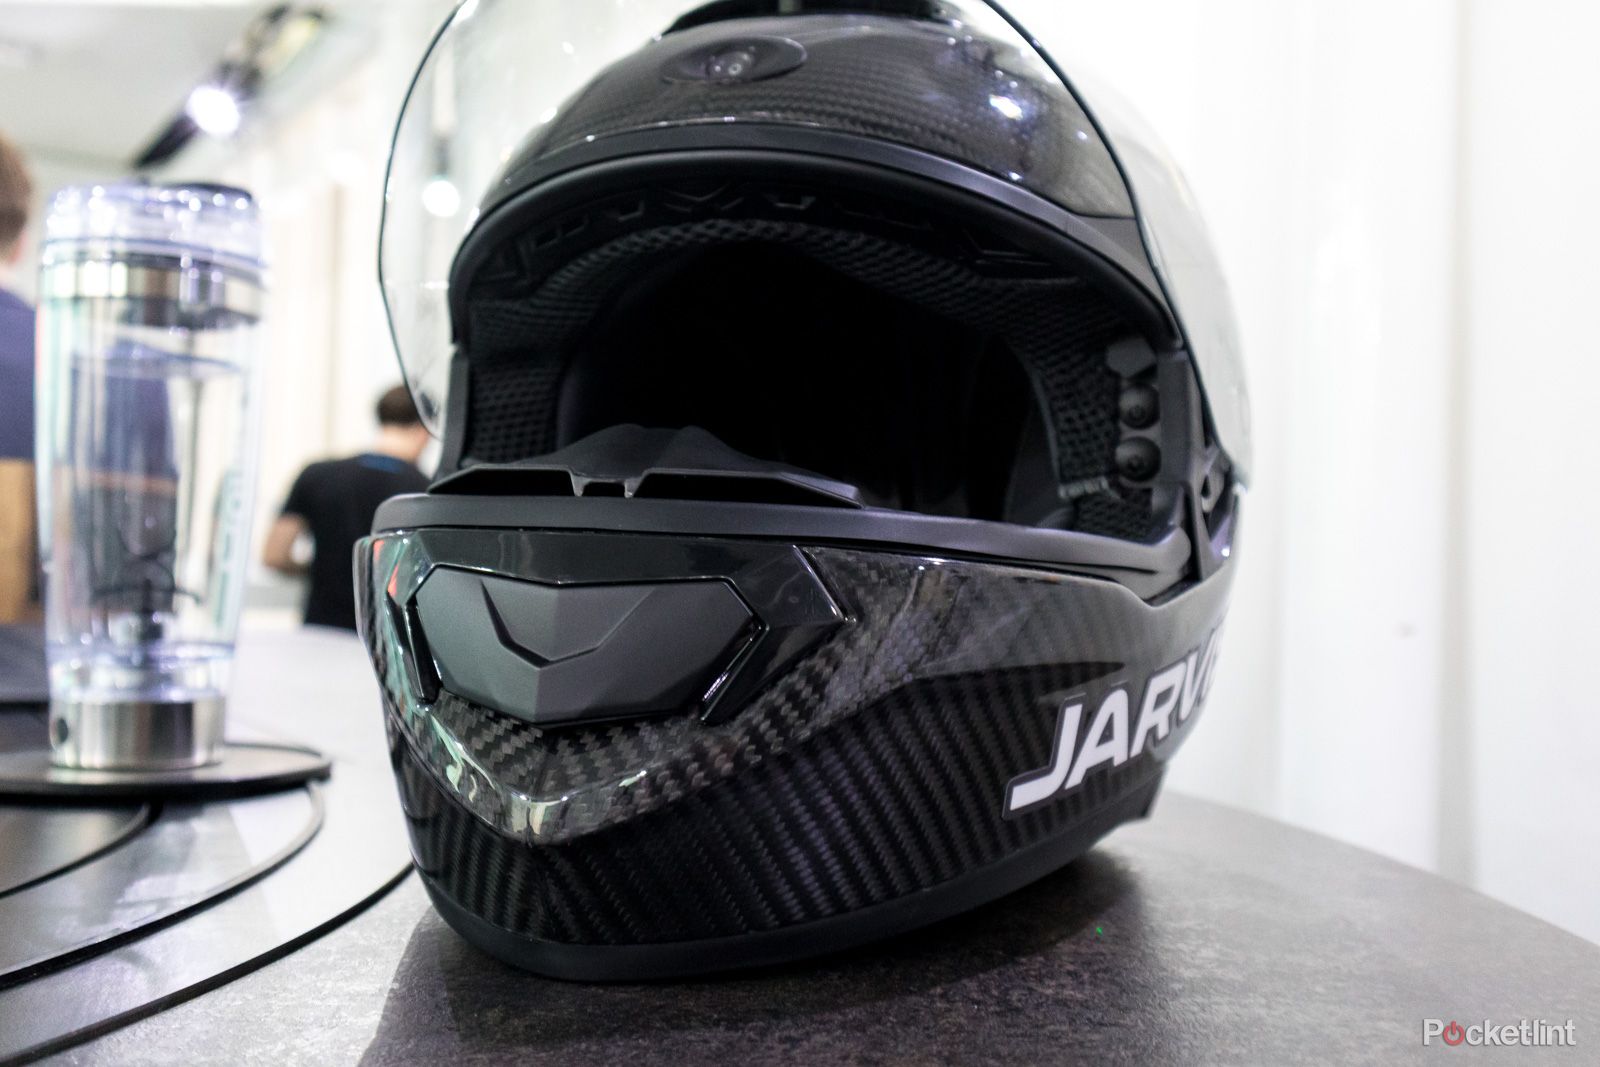 Jarvish smart motorcycle helmet coming to UK with Alexa support built in image 1